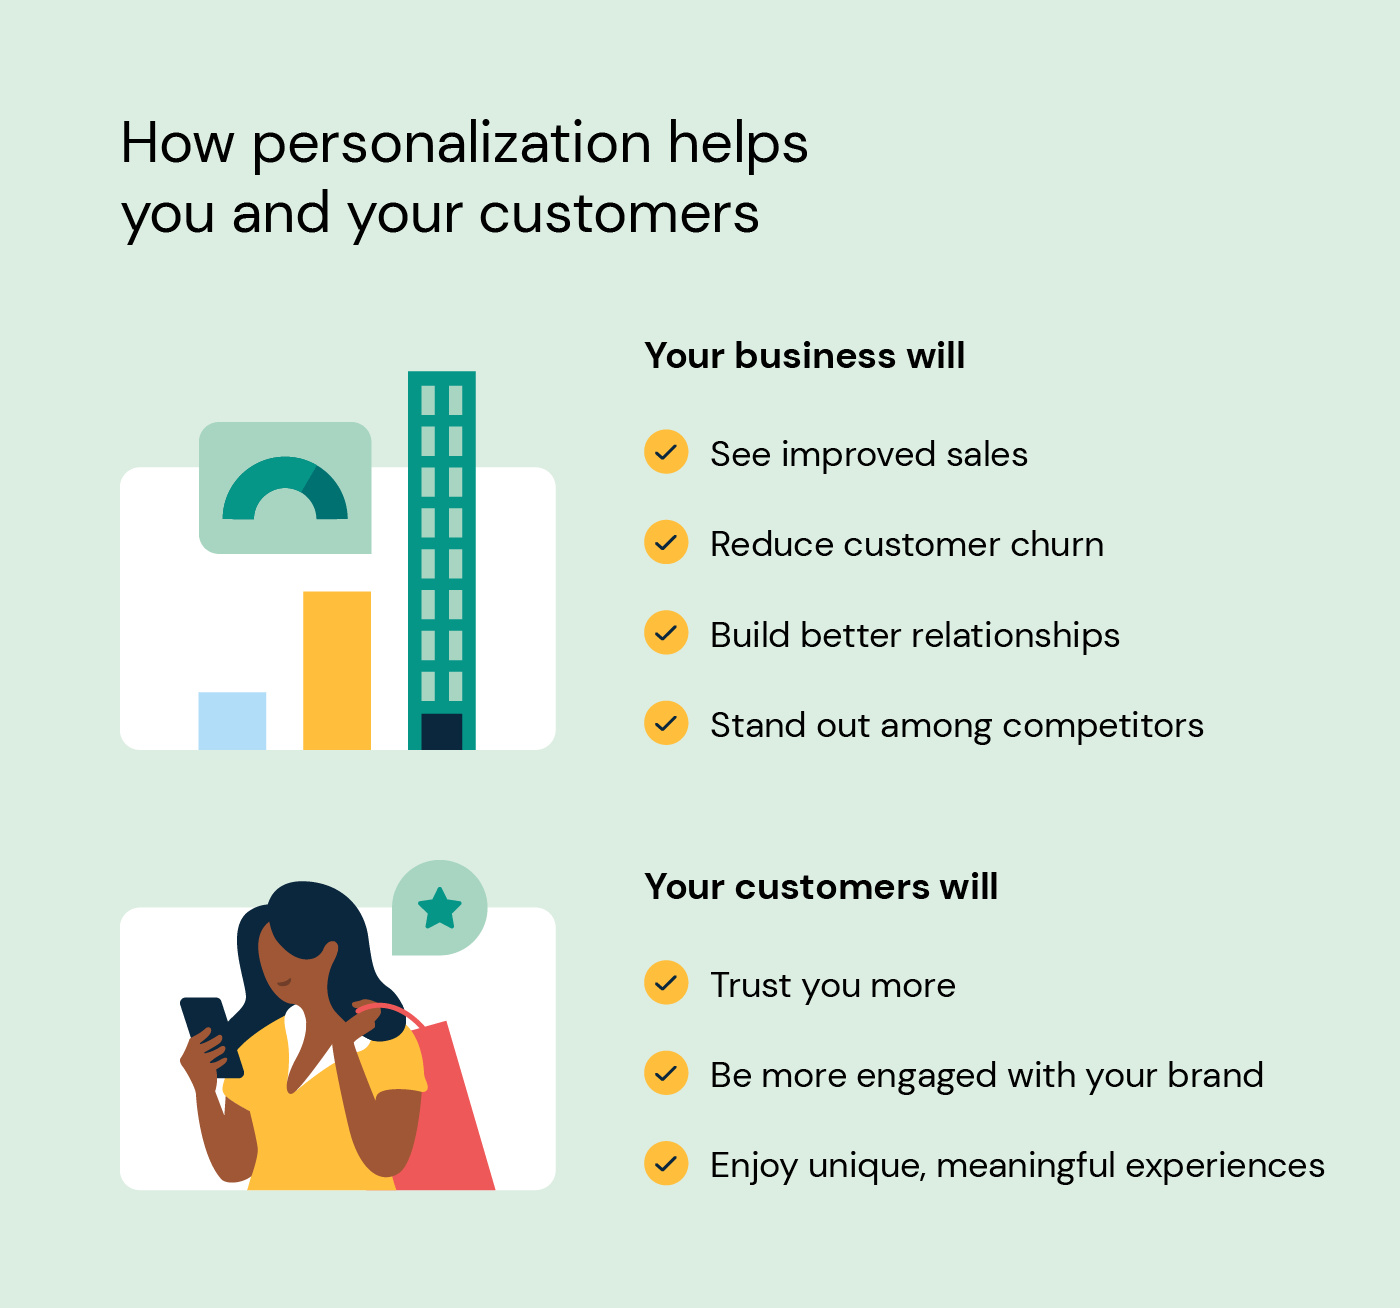 Illustration shows the benefits of personalization for businesses and customers